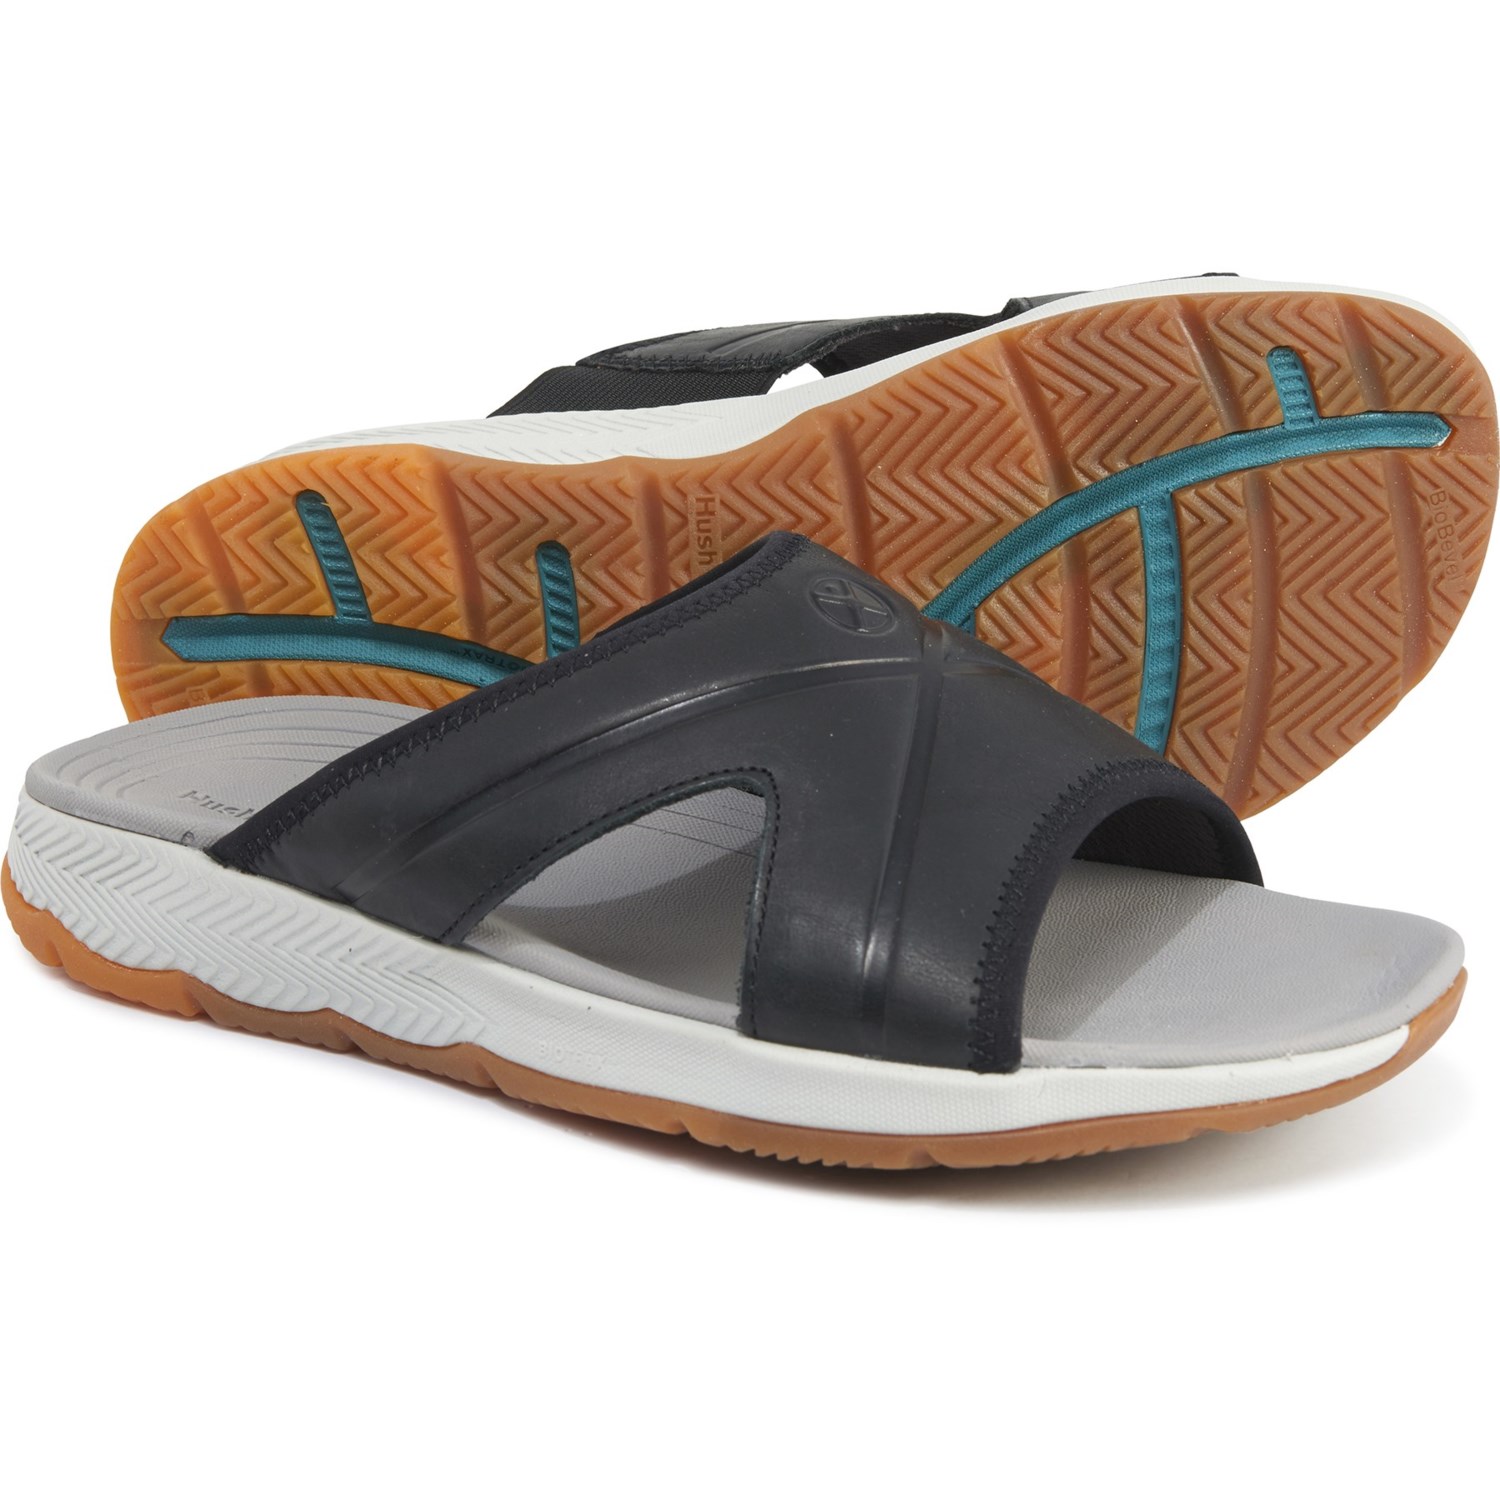 hush puppies men's leather hawaii thong sandals